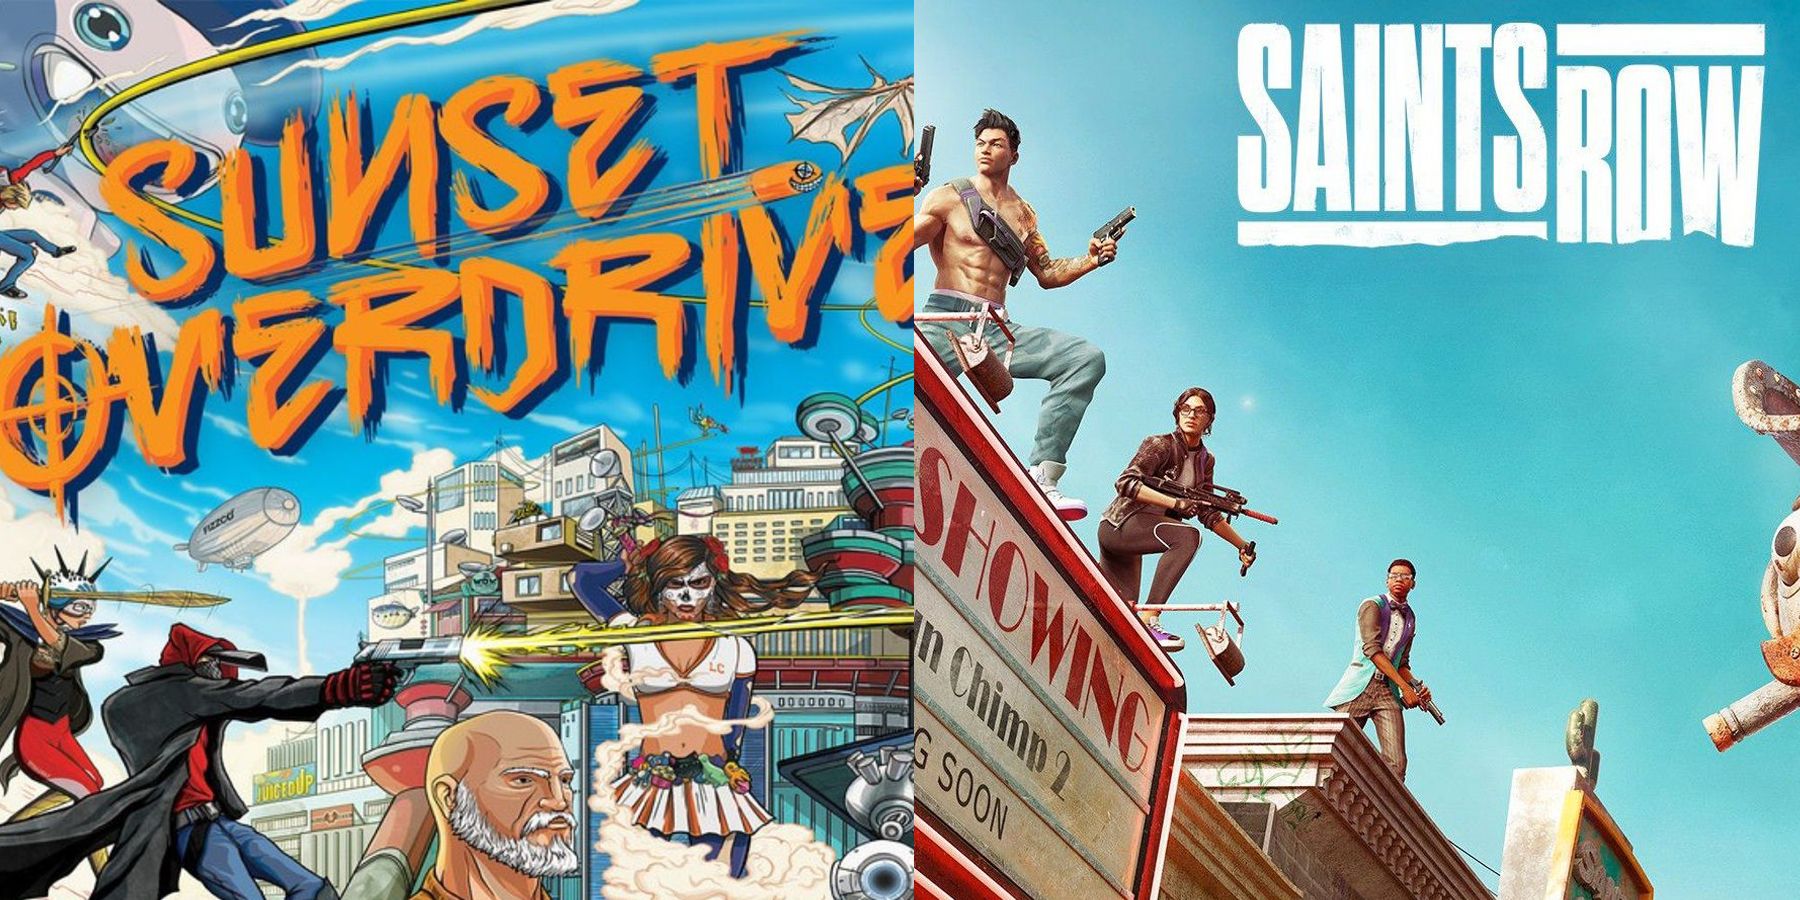 Chances of Insomniac Games releasing Sunset Overdrive for PS4/PS5